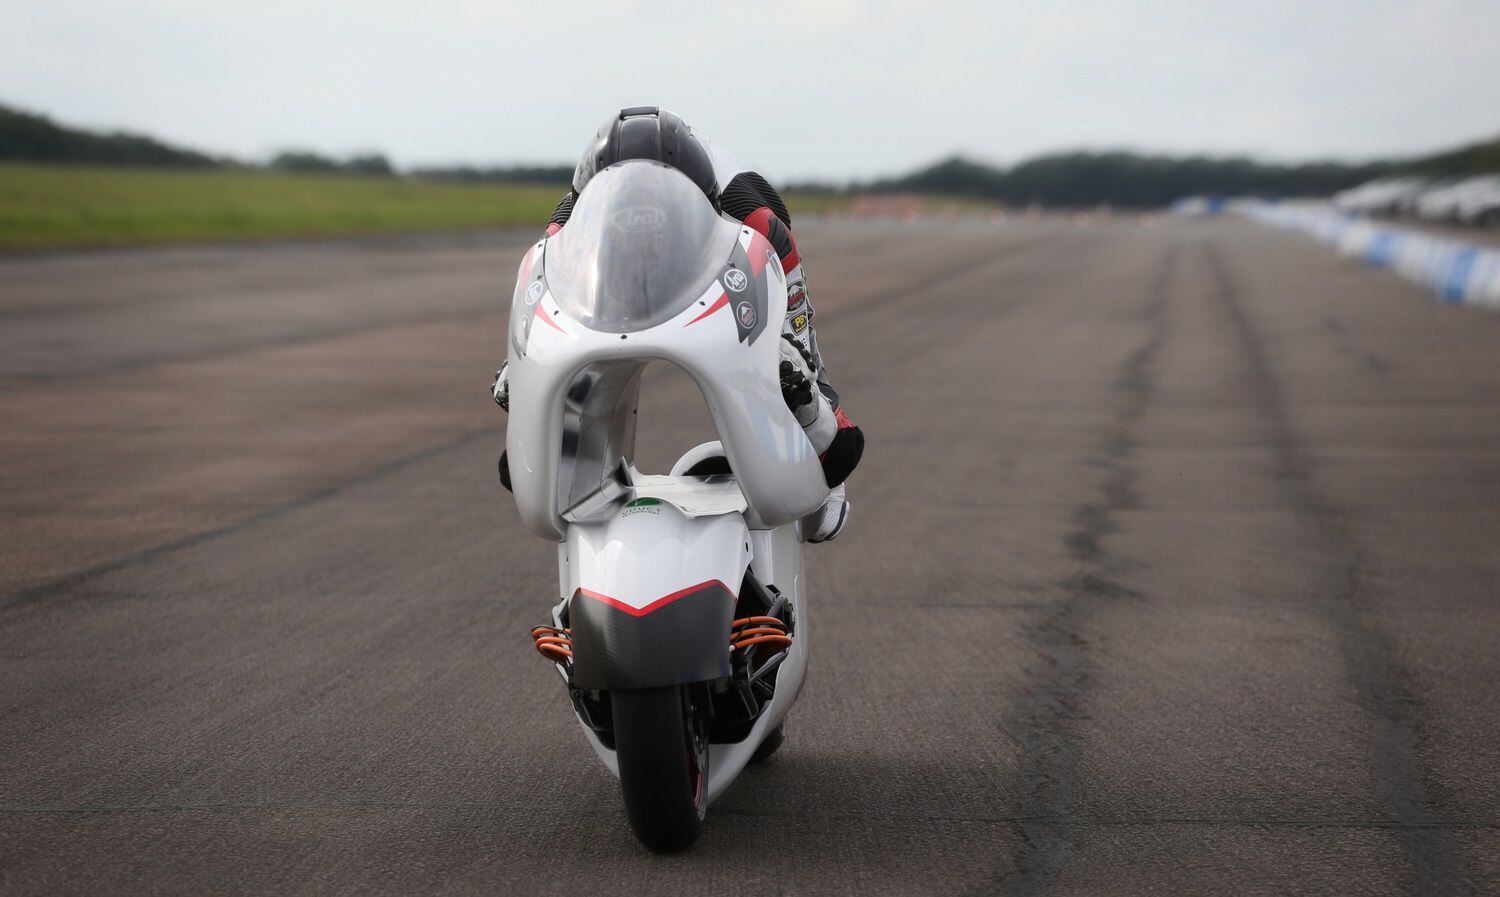 CFD and wind-tunnel tests suggest the WMC250EV has 70 percent less aerodynamic drag than top streetbikes.